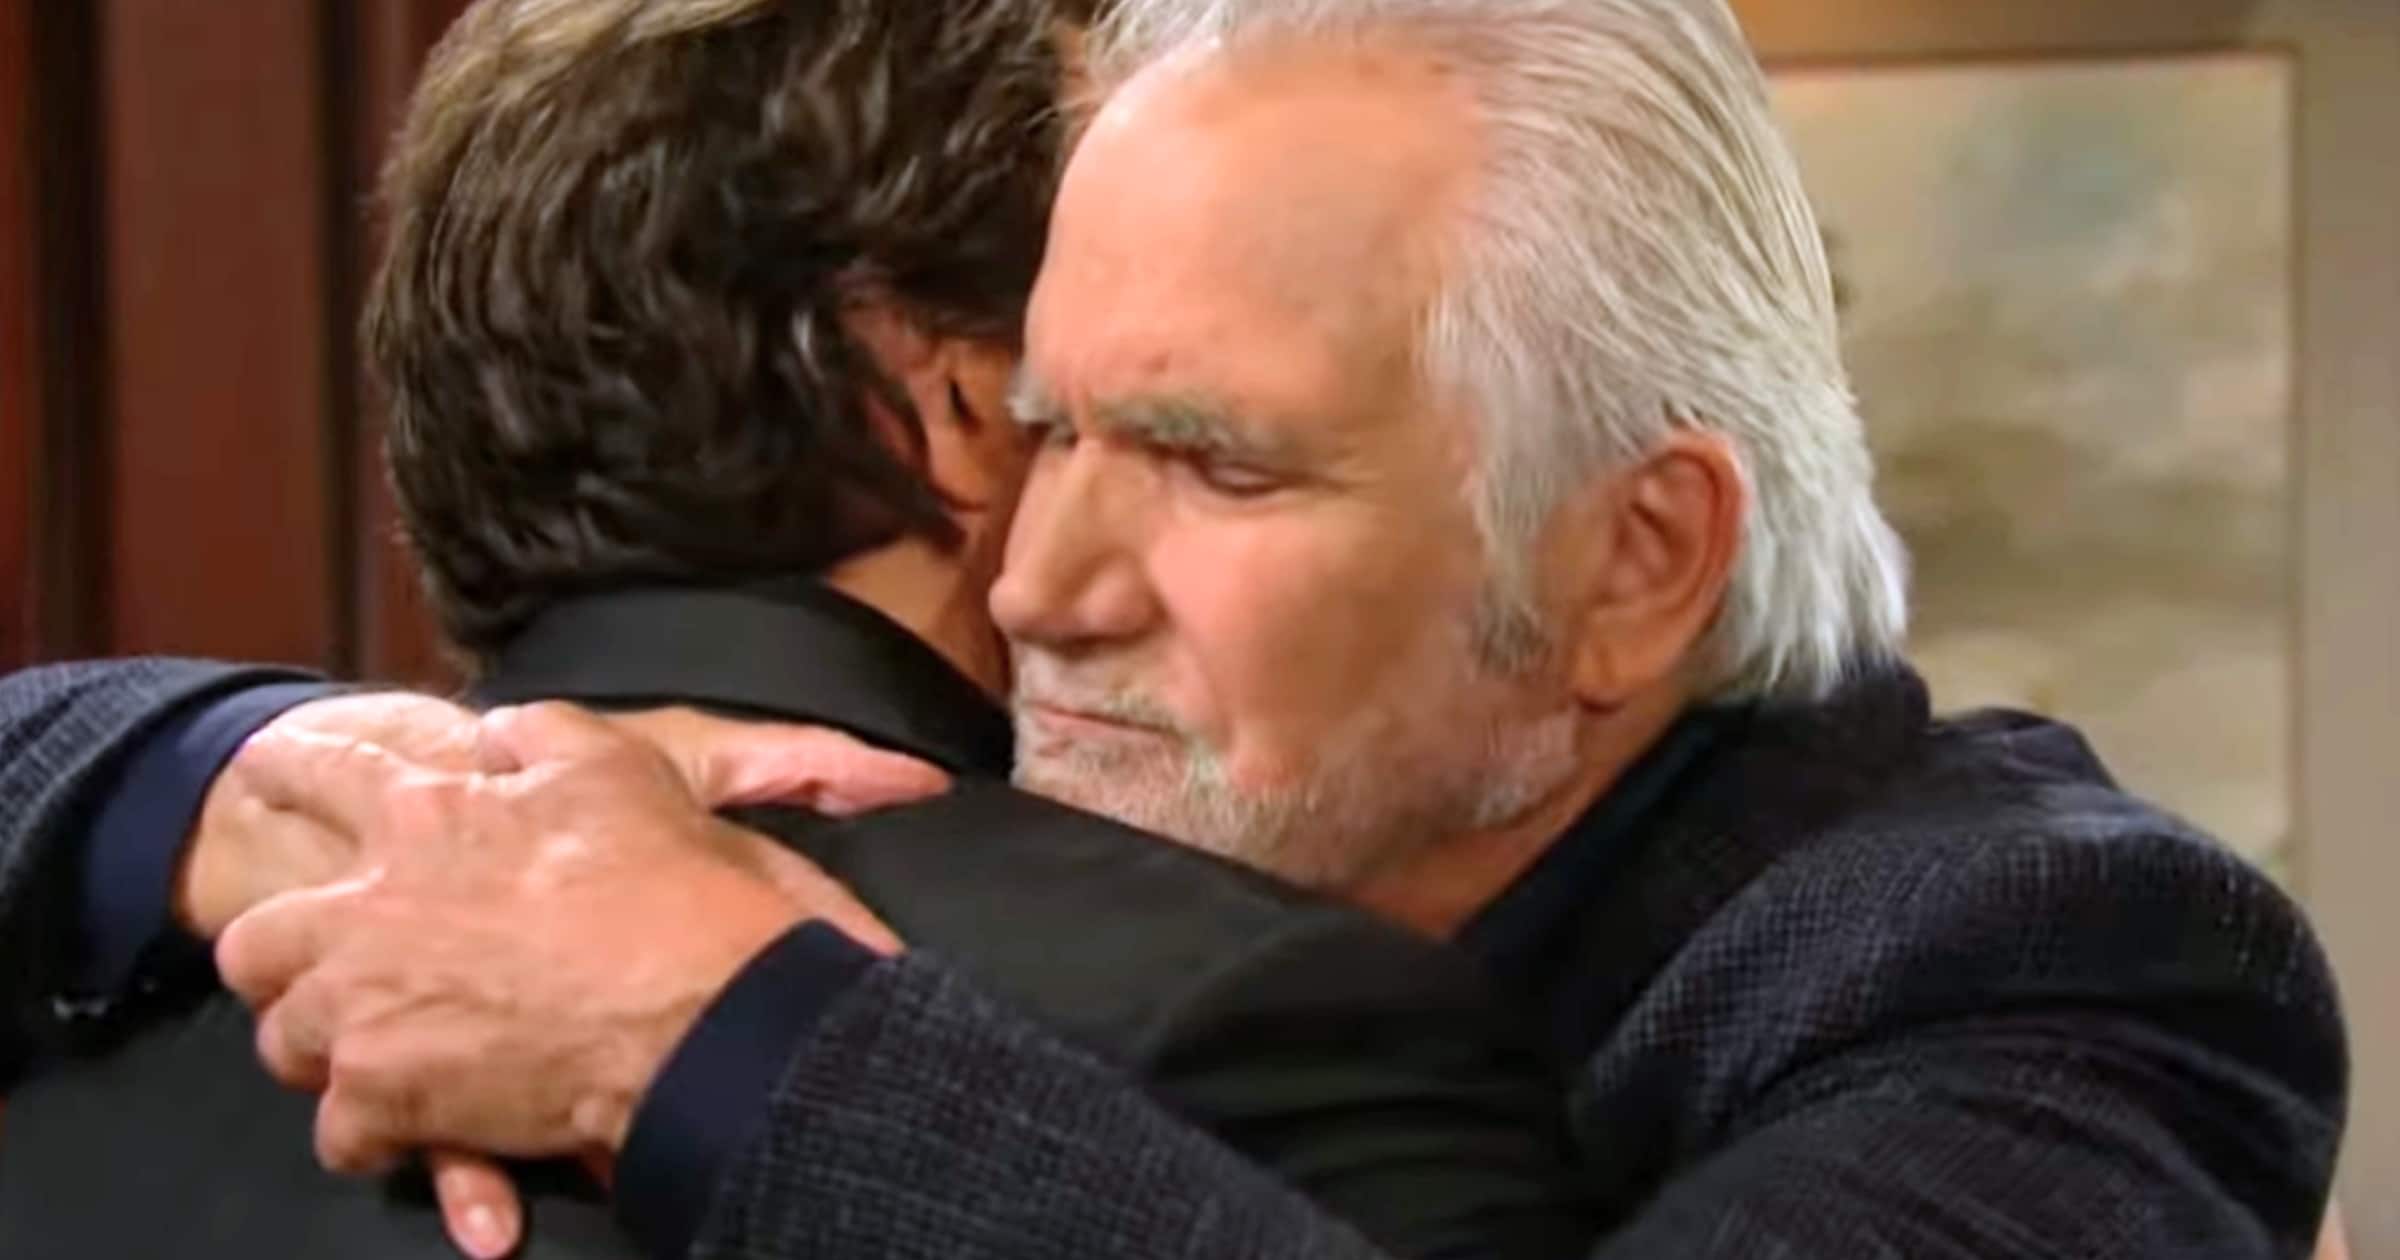 The Bold and the Beautiful - Nov 6 - Eric and Ridge